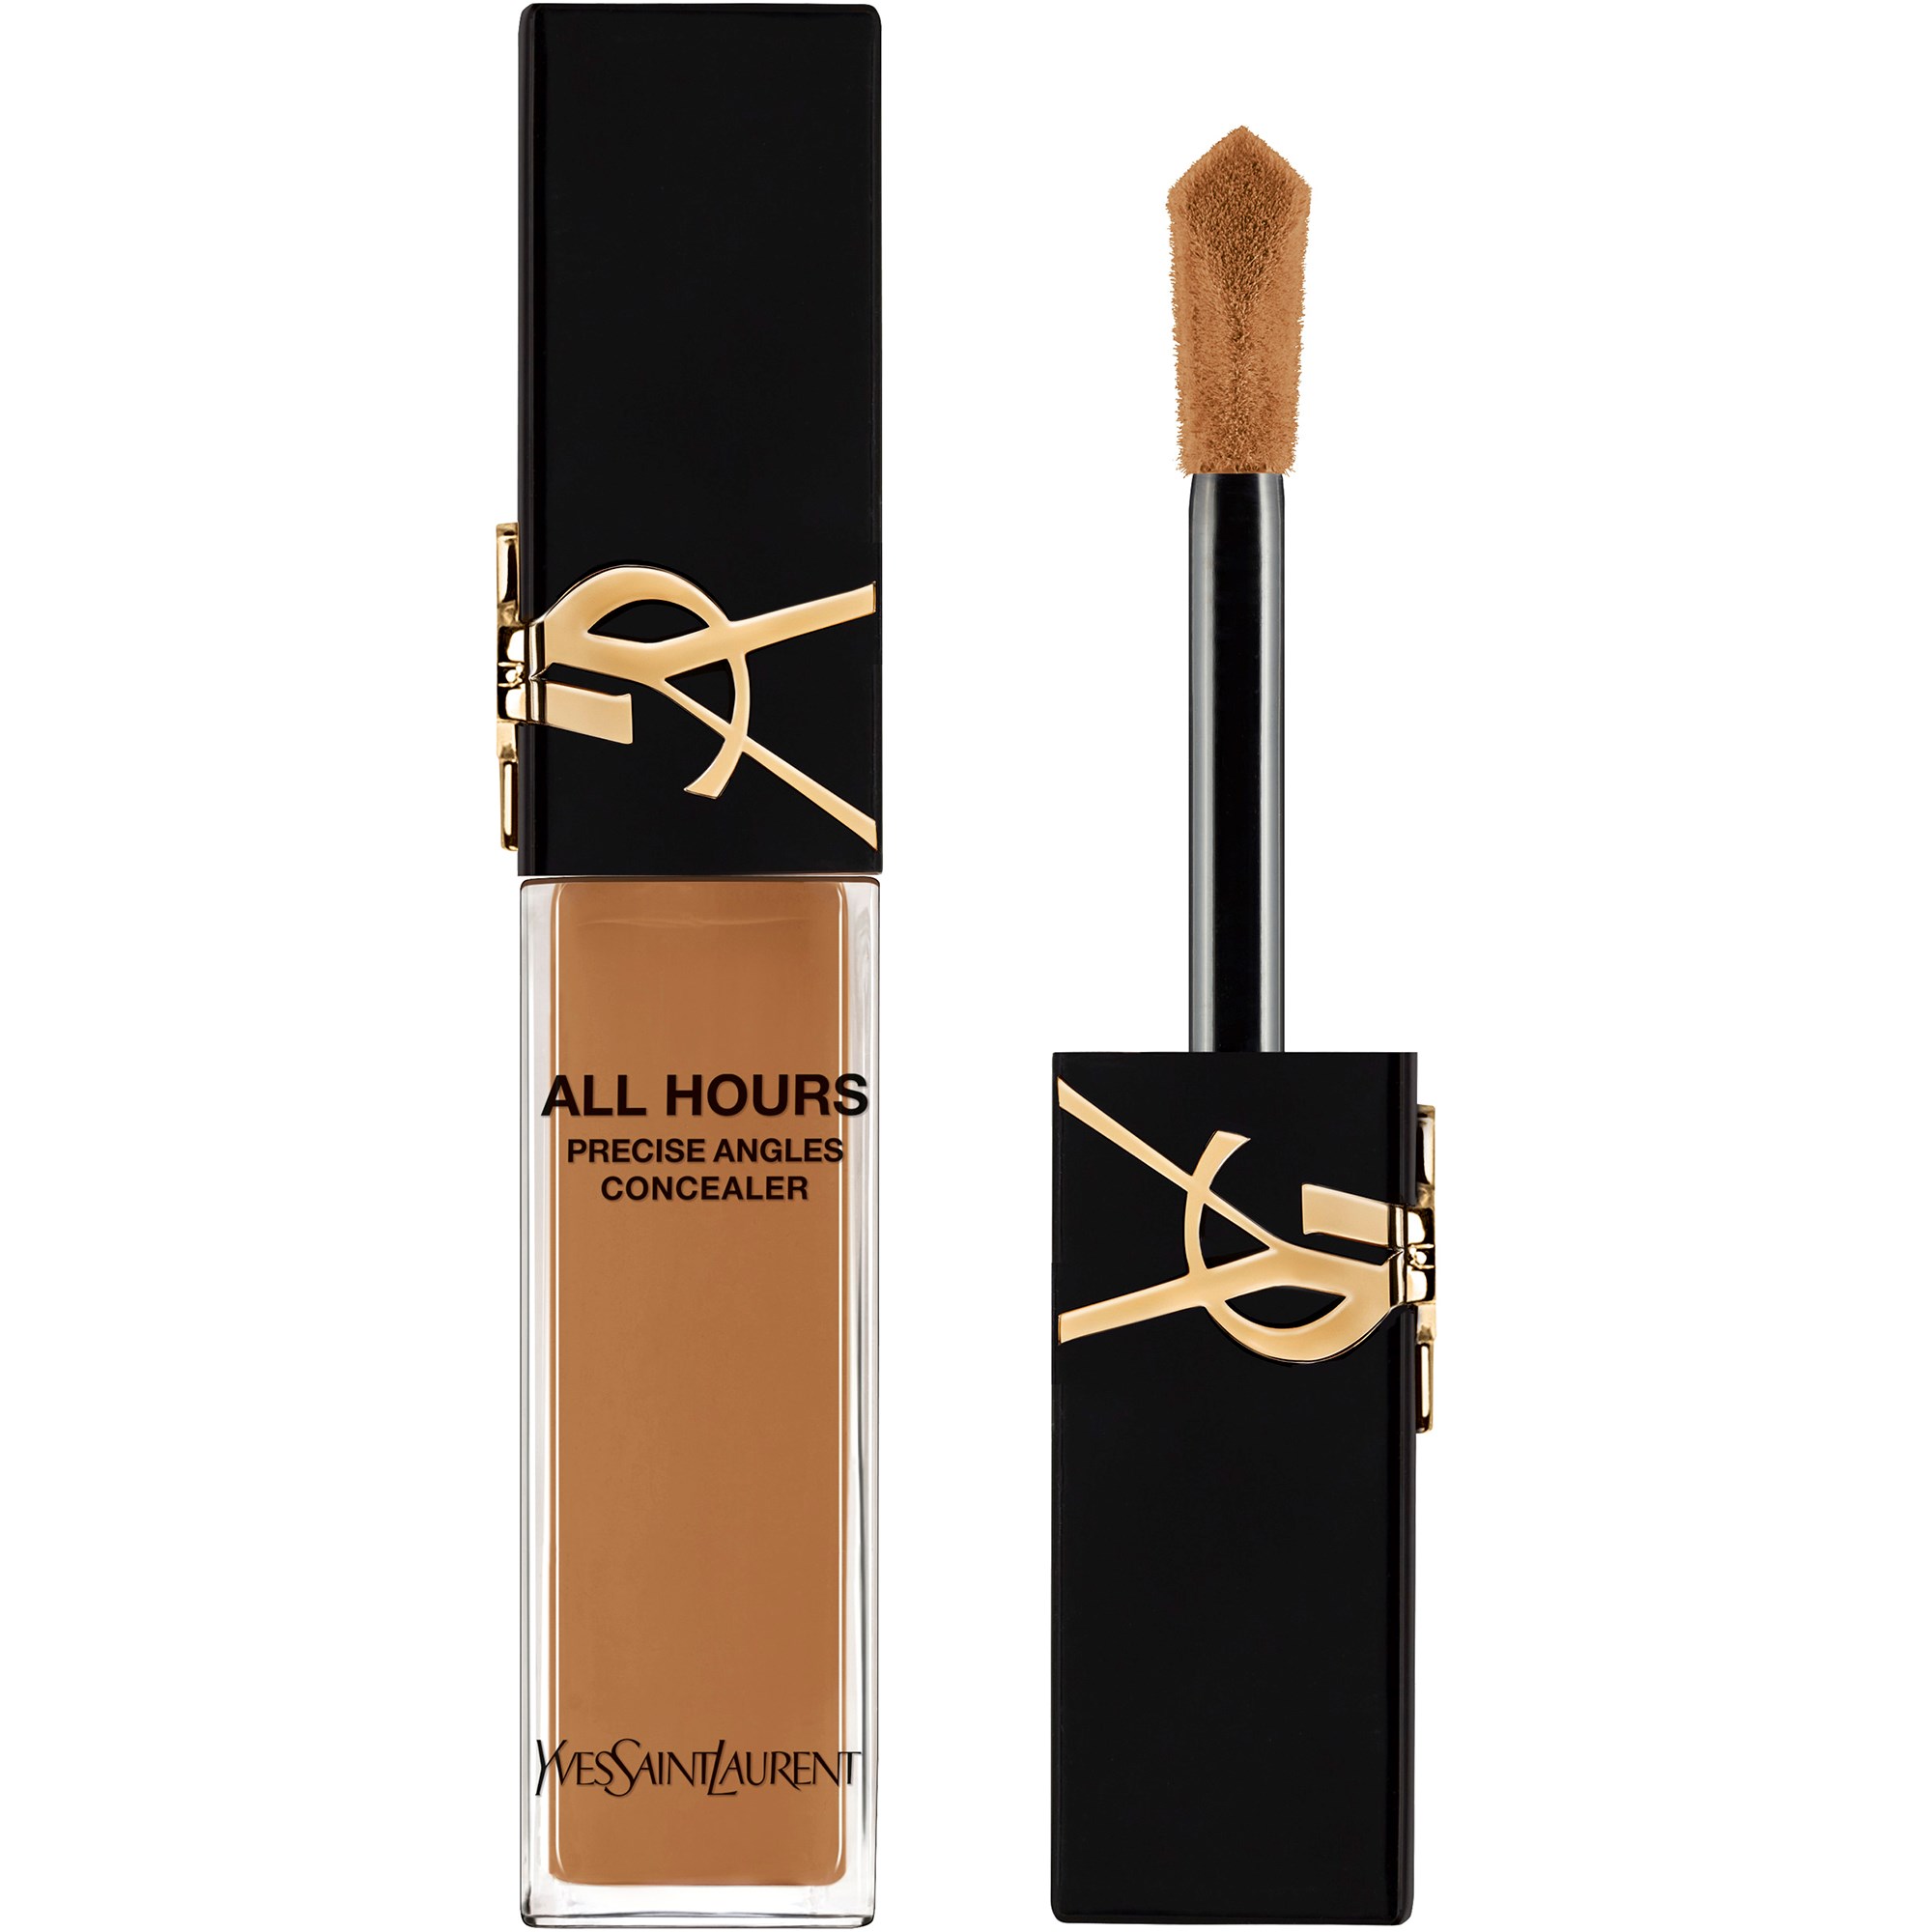 Yves Saint Laurent All Hours Precise Angles Concealer DN1